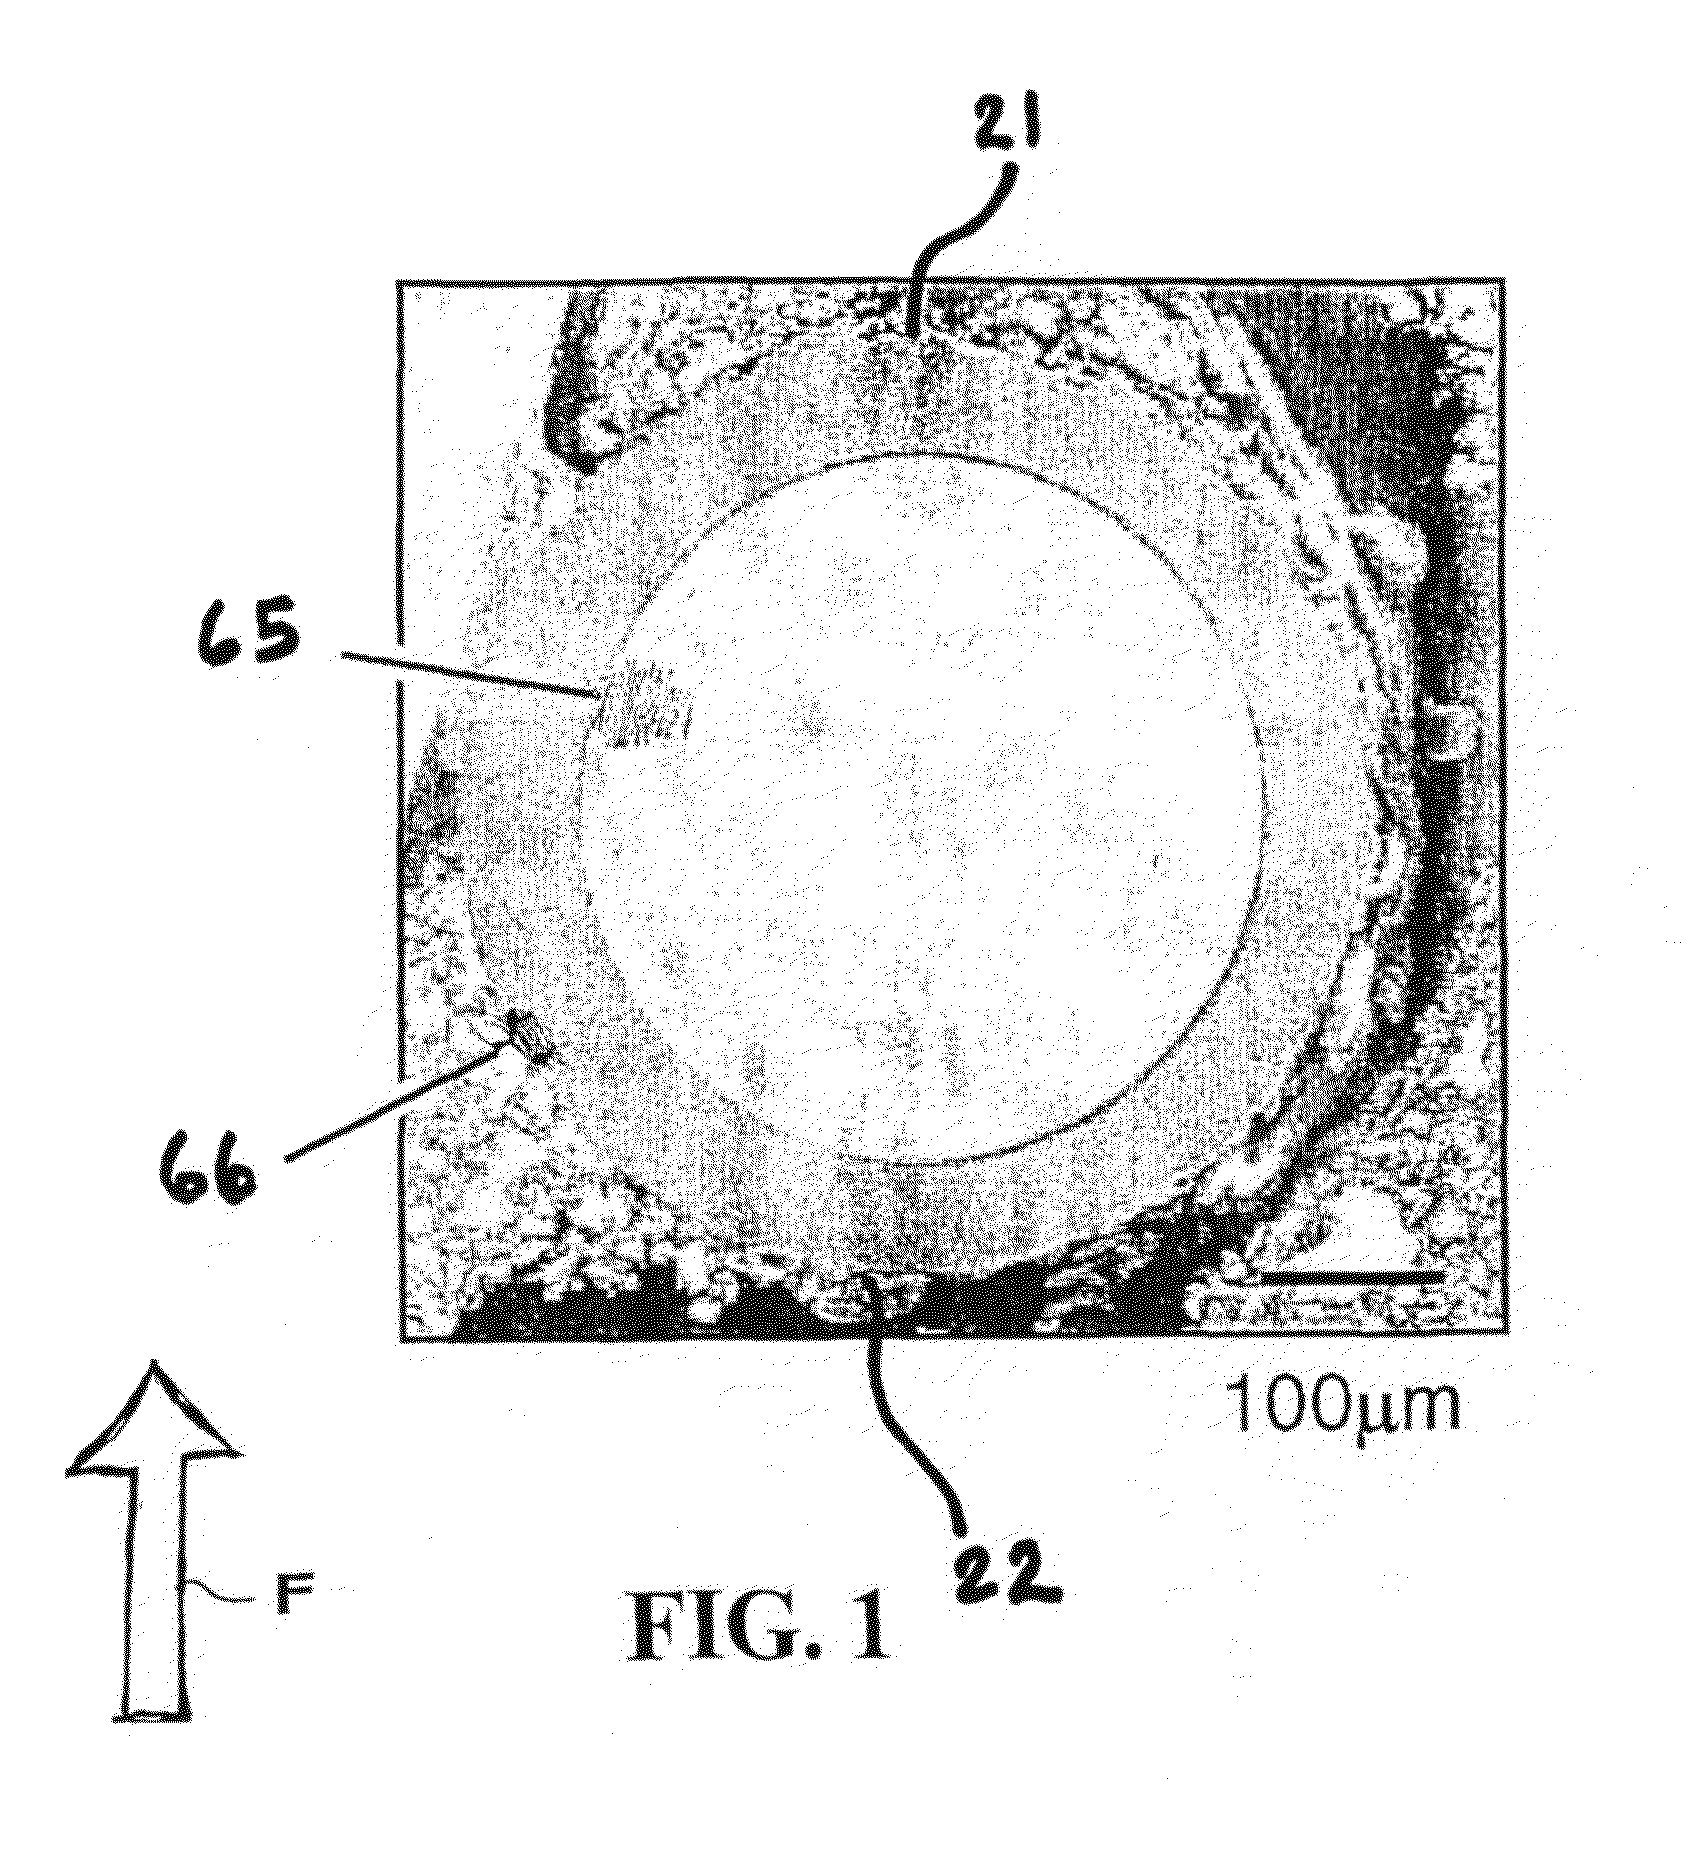 Apparatus and method for applying coatings onto the interior surfaces of components and related structures produced therefrom